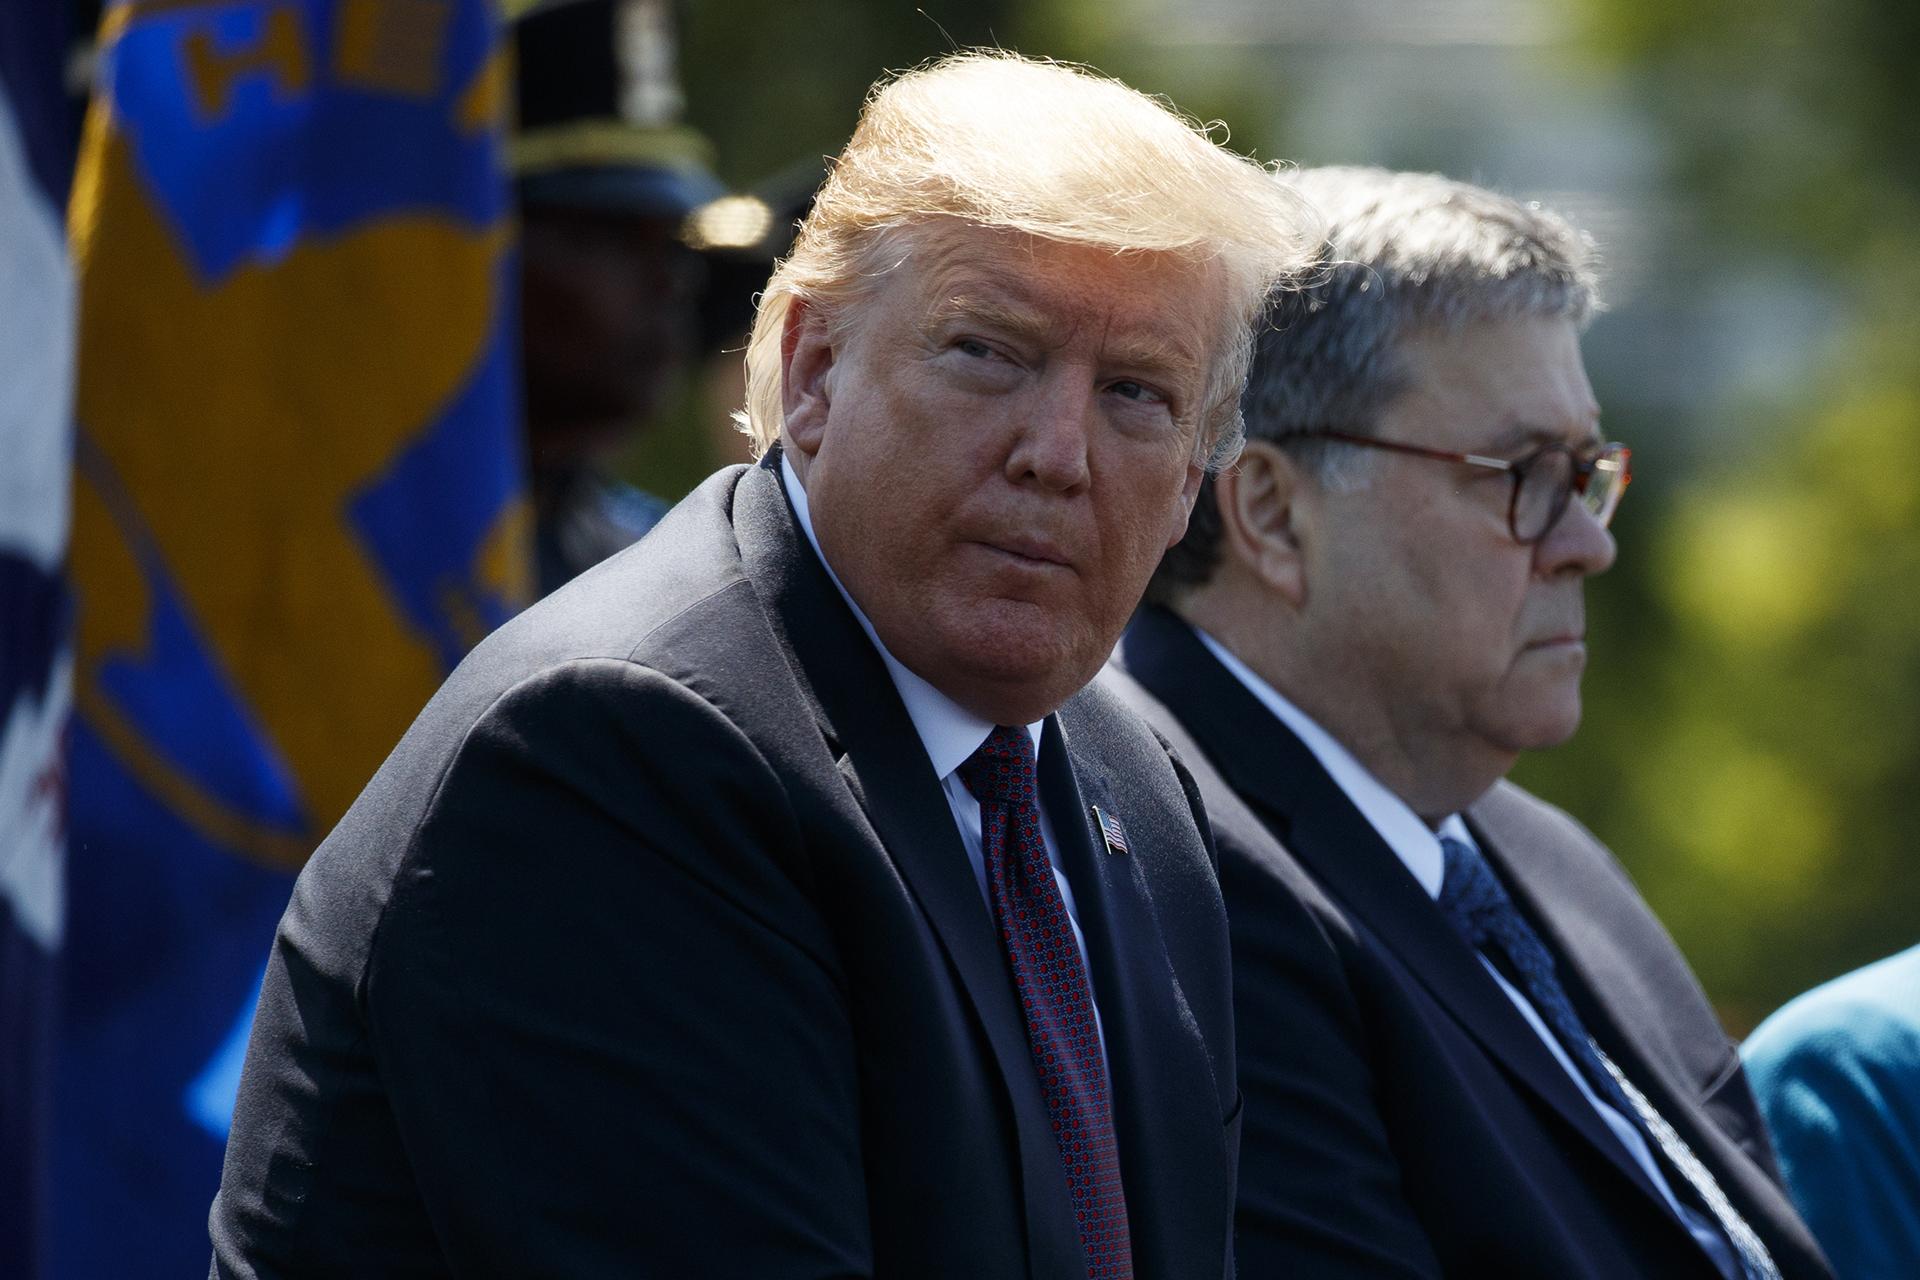 President Donald Trump sits with Attorney General William Barr during the 38th Annual National Peace Officers’ Memorial Service at the U.S. Capitol, Wednesday, May 15, 2019, in Washington. (AP Photo / Evan Vucci)